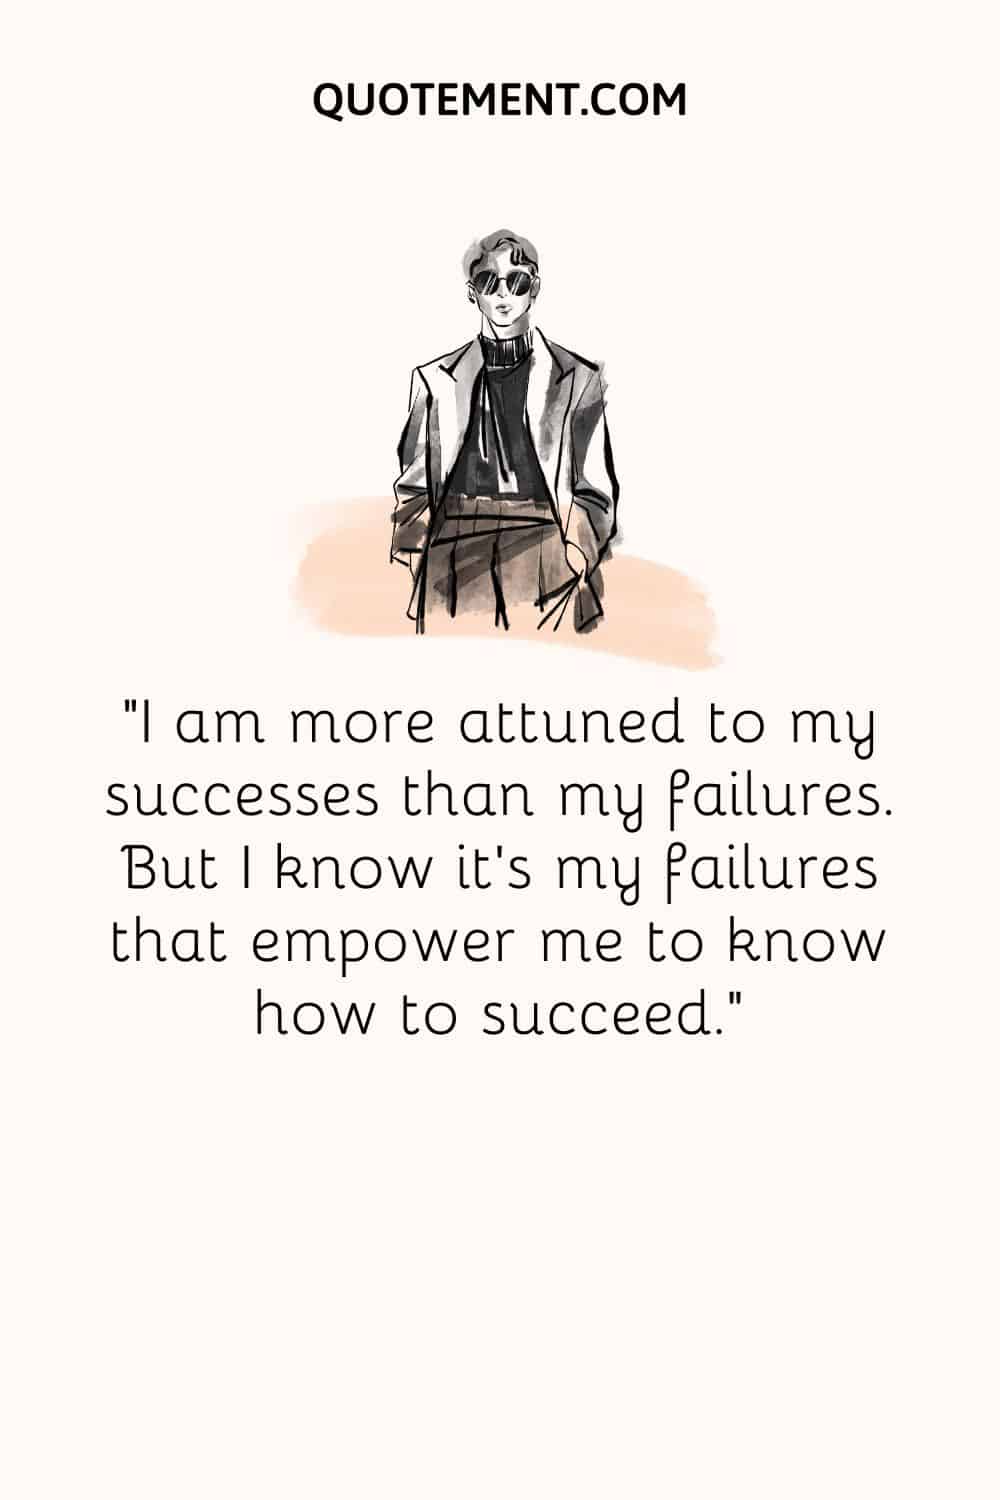 I am more attuned to my successes than my failures